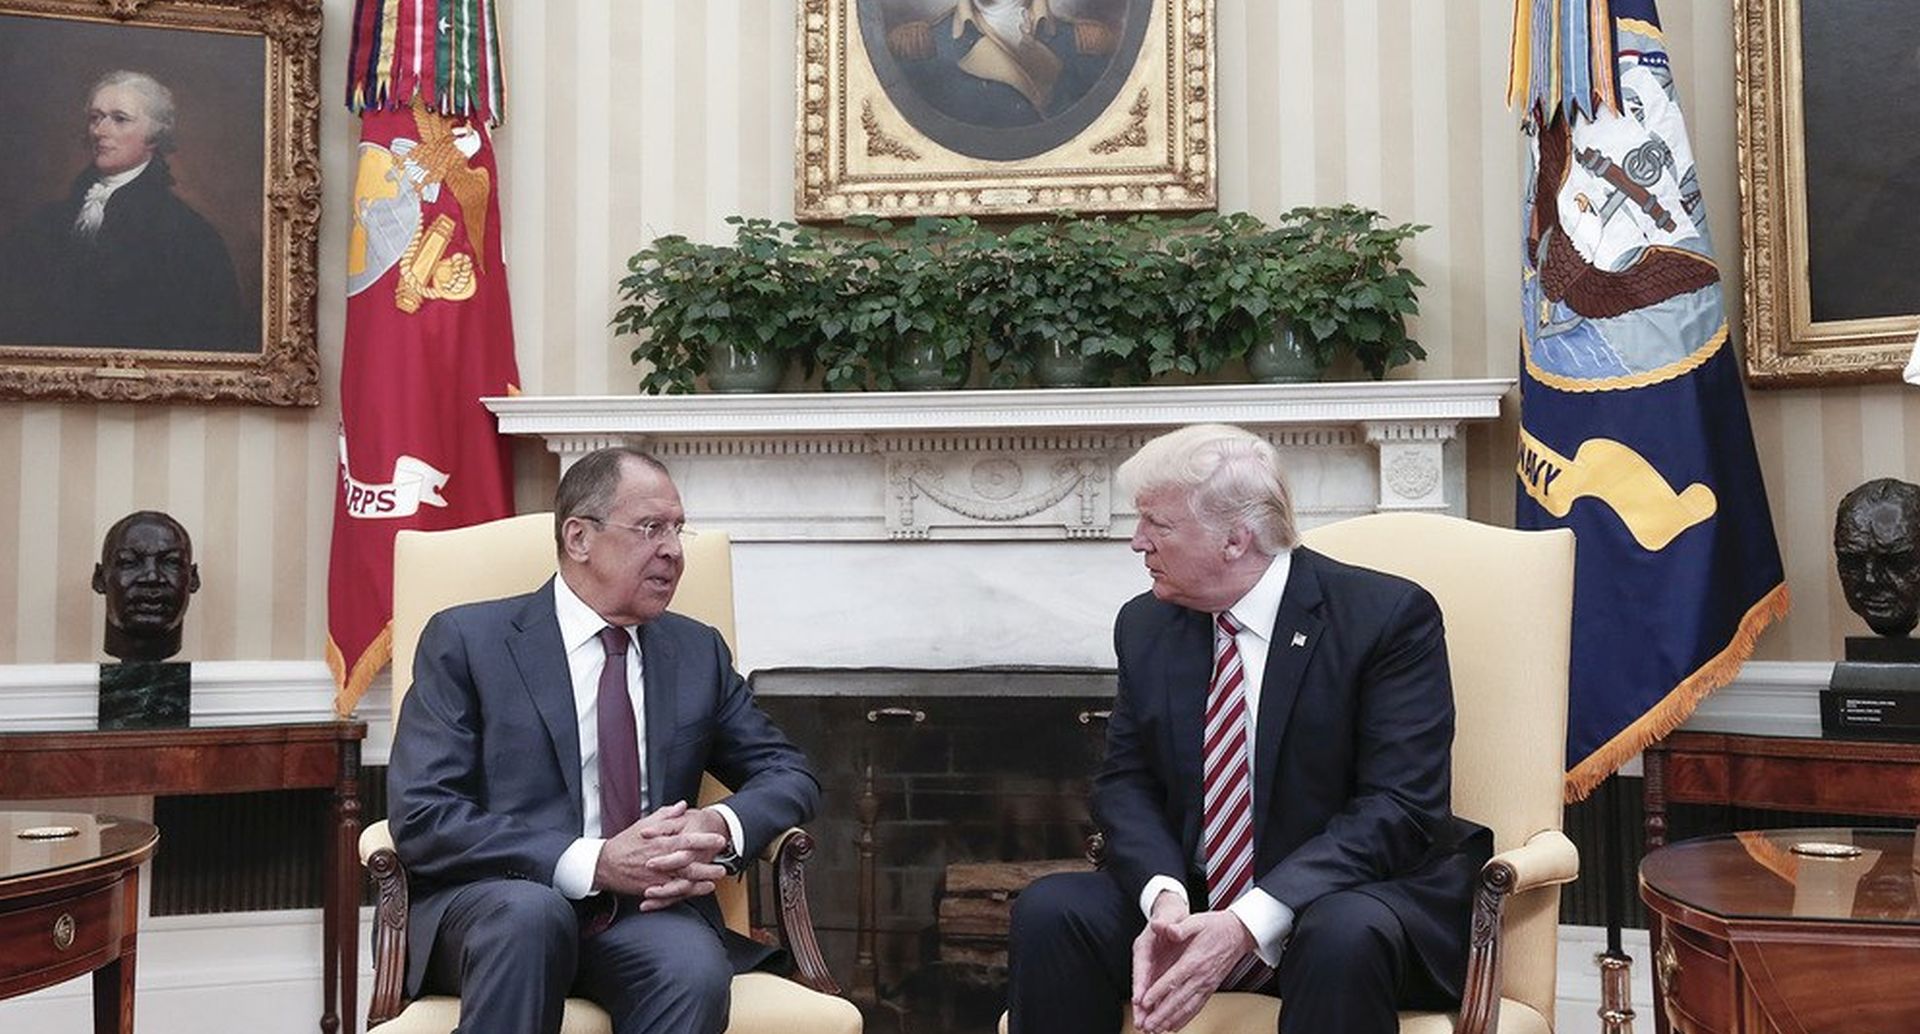 epa05967424 (FILE) - A file handout photo made available by the Russian Foreign Ministry shows US President Donald J. Trump (R) speaking with Russian Foreign Minister Sergei Lavrov (L) during their meeting in the White House in Washington, DC, USA, 10 May 2017 . Media reports on 15 May 2017 state that National Security Advisor Lieutenant General H.R. McMaster said a Washington Post report that claims US President Donald J. Trump disclosed classified information to Russian officials was false.  EPA/RUSSIAN FOREIGN MINISTRY HANDOUT MANDATORY CREDIT HANDOUT EDITORIAL USE ONLY/NO SALES